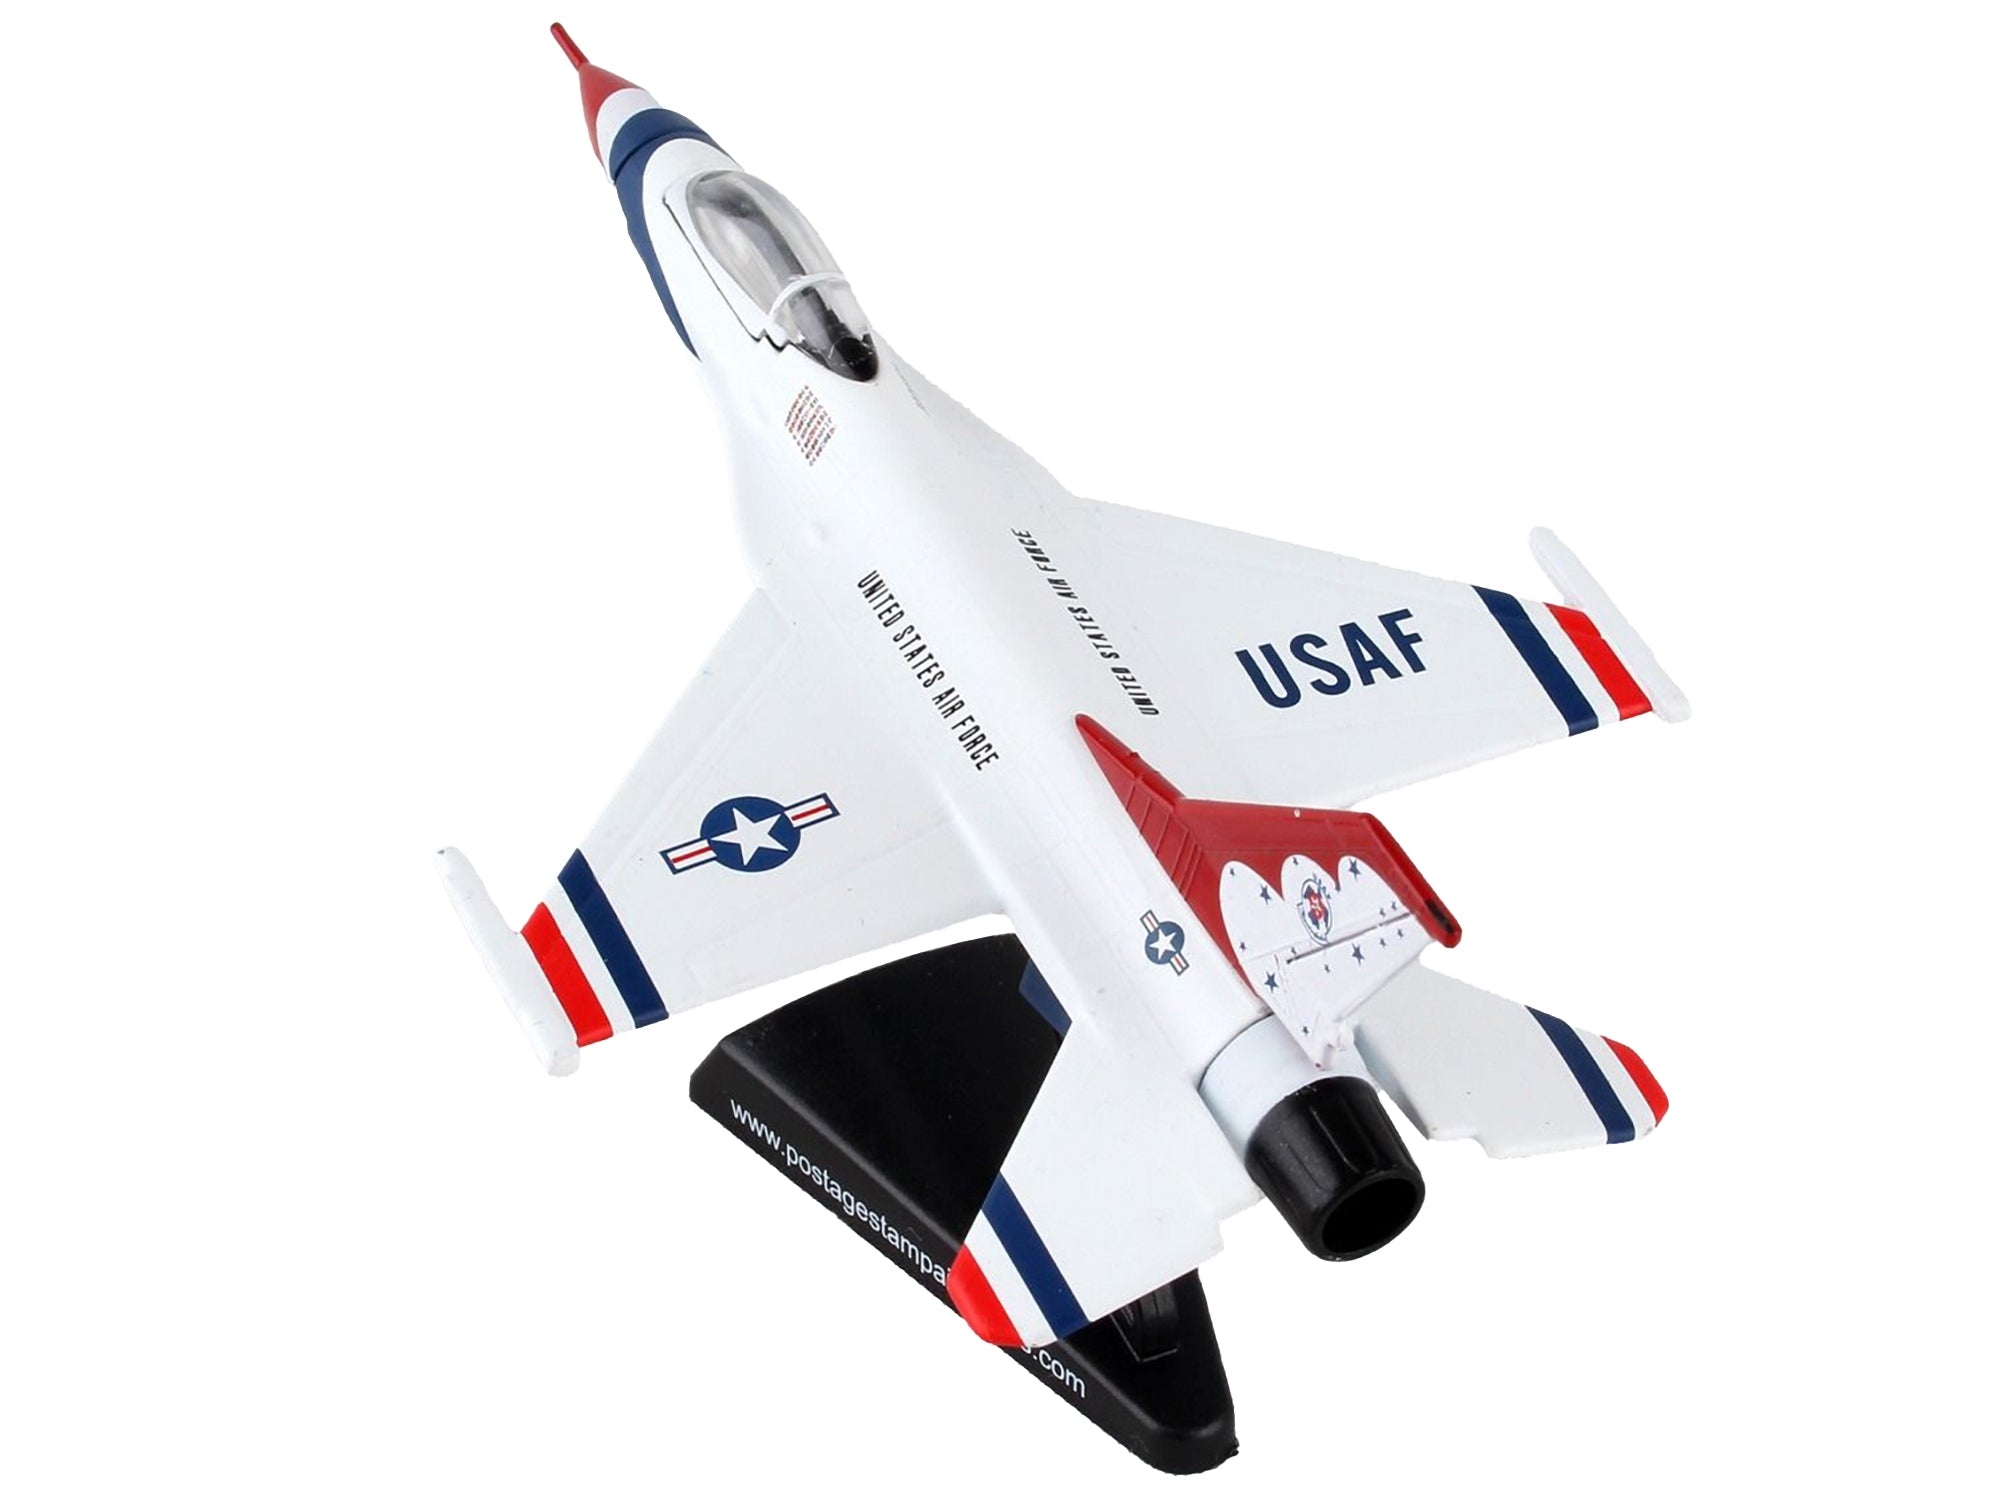 Lockheed Martin F-16 Fighting Falcon Fighter Aircraft "Thunderbirds" United States Air Force 1/126 Diecast Model Airplane by Postage Stamp